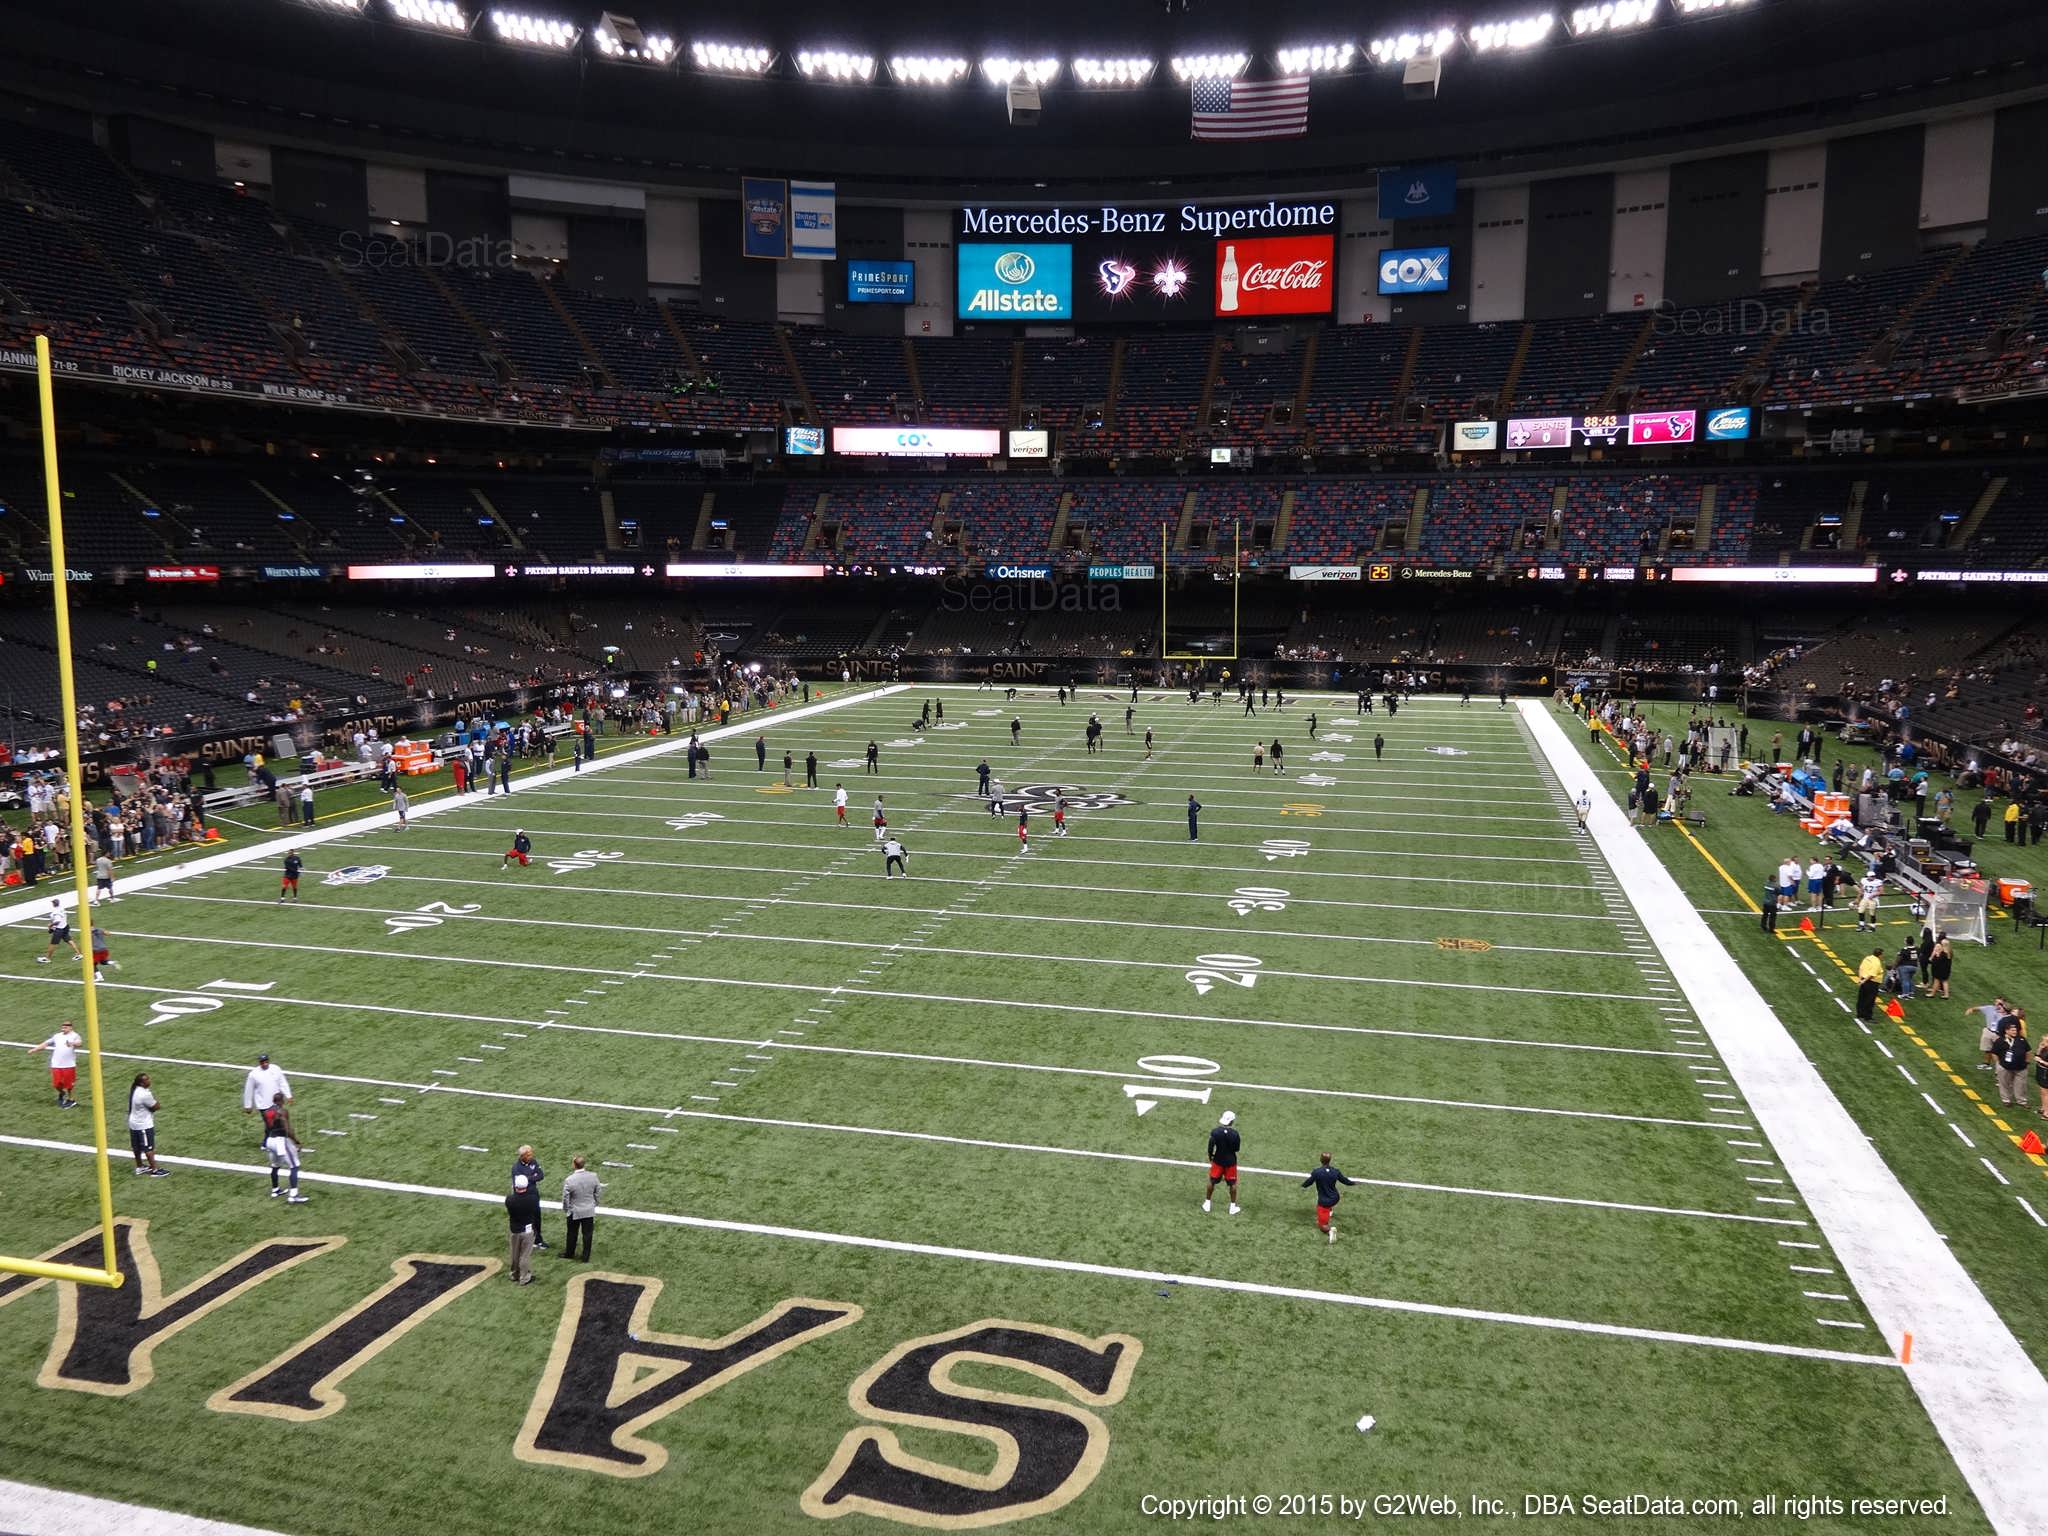 Seat view from section 281 at the Mercedes-Benz Superdome, home of the New Orleans Saints